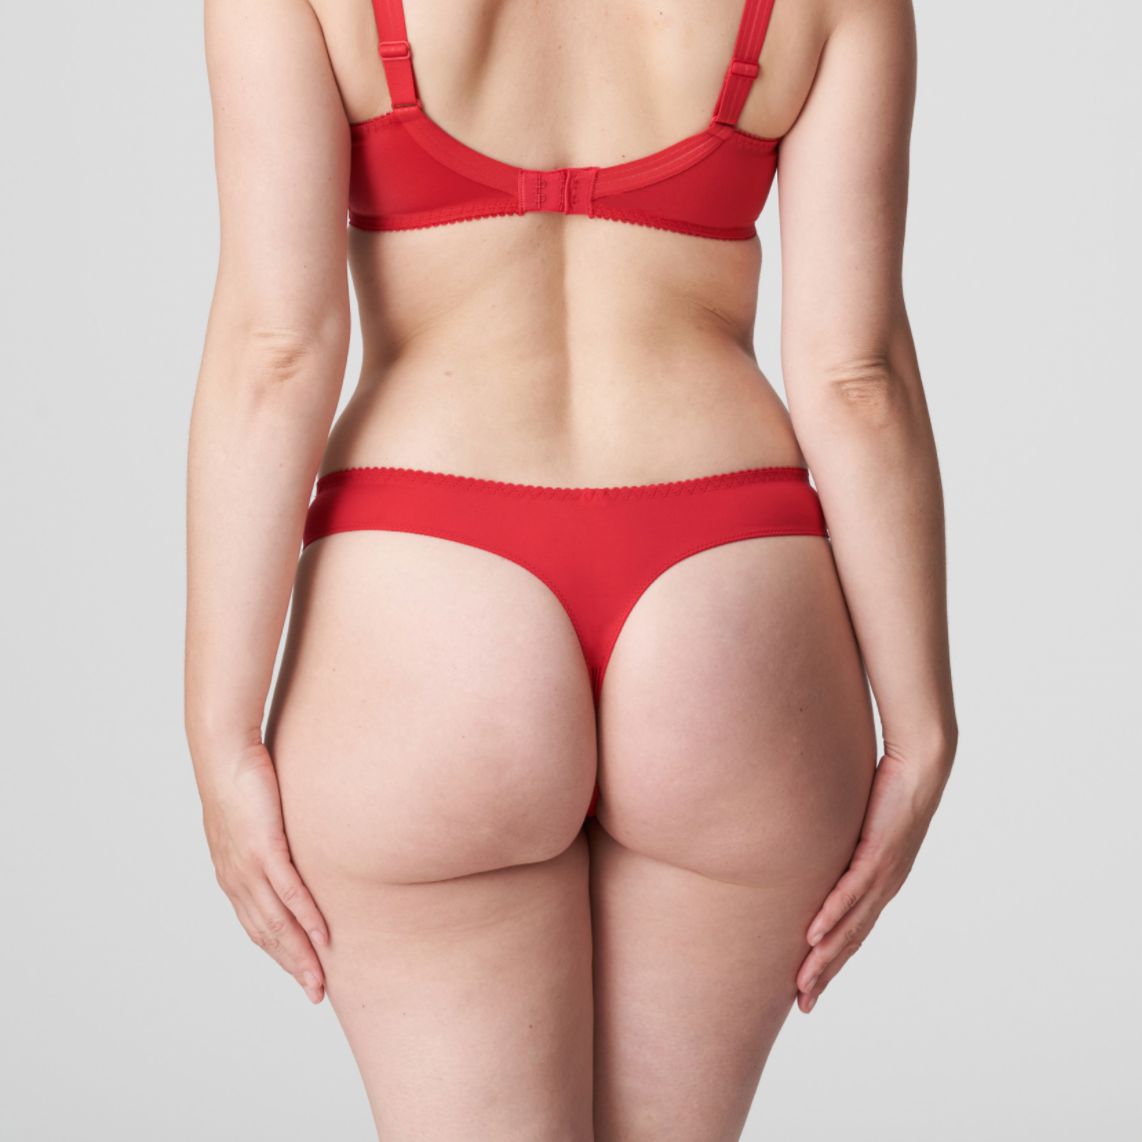 Prima Donna Deauville Thong in Scarlet 0661815-Panties-Prima Donna-Scarlet-Medium-Anna Bella Fine Lingerie, Reveal Your Most Gorgeous Self!